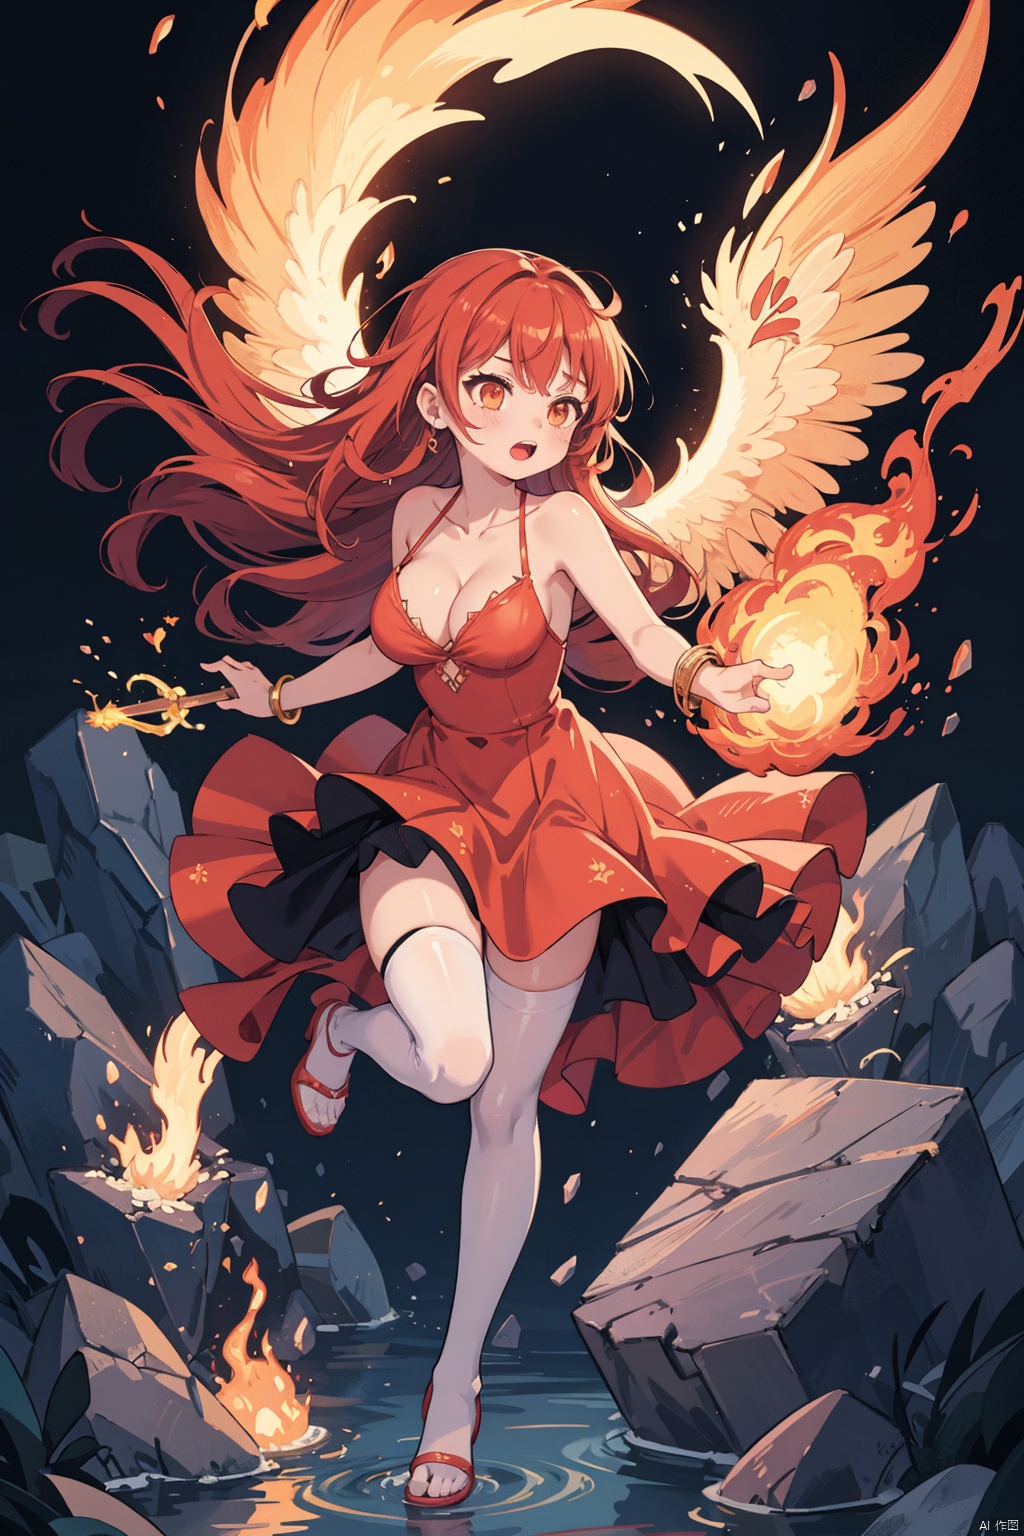 1girl, bracelet, breasts, breathing_fire, burning, cleavage, dress, explosion, fiery_hair, fiery_wings, fire, flame, flaming_sword, flaming_weapon, full_body, jewelry, long_hair, magic, molten_rock, open_mouth, orange_eyes, phoenix, pyrokinesis, red_dress, red_eyes, red_hair, tail-tip_fire, thighhighs, torch, white_legwear